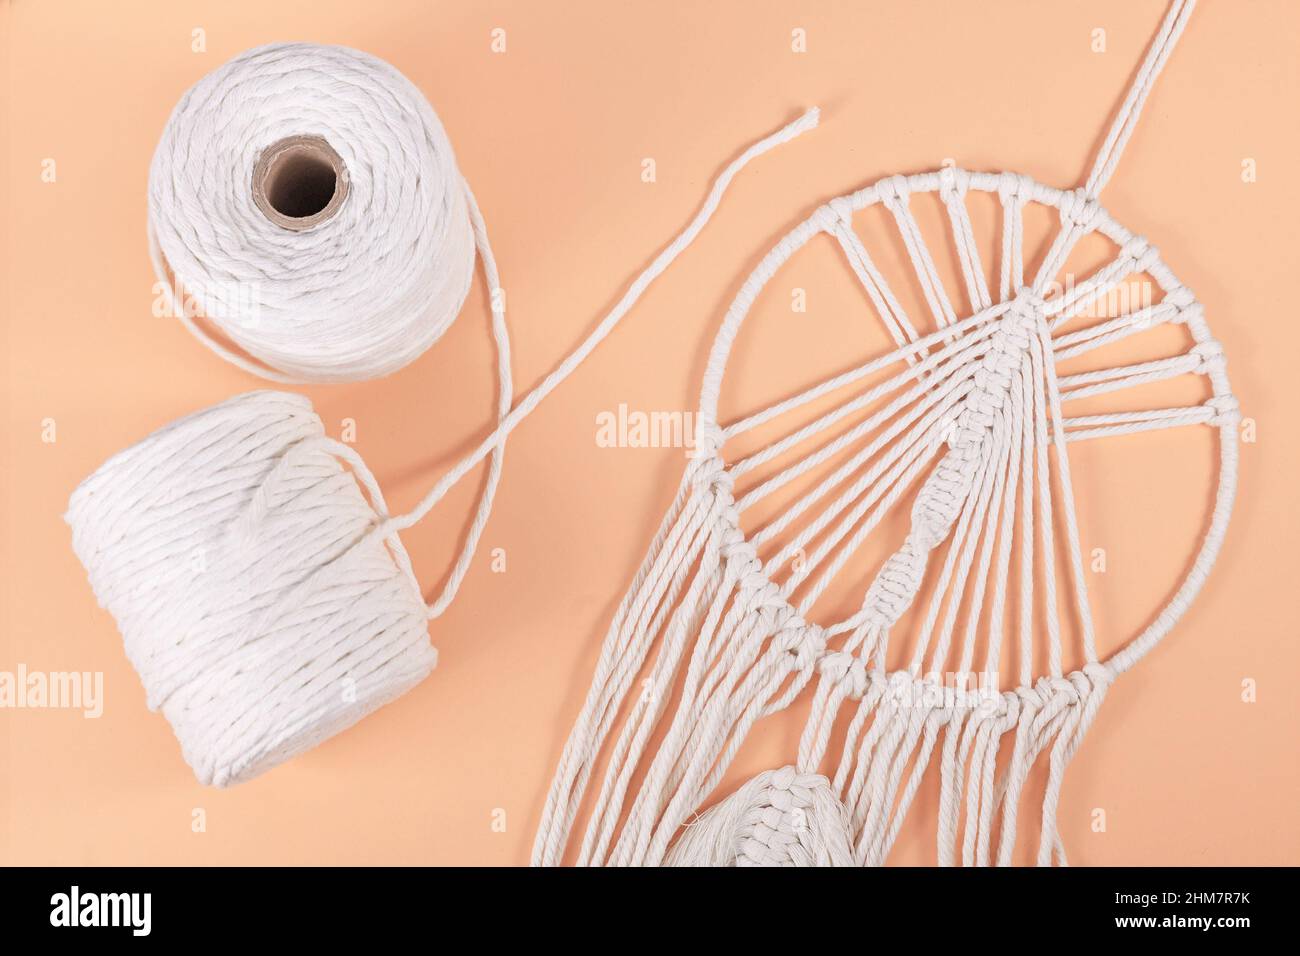 Rolls of cotton macrame cord and finished wall hanging object on beige background Stock Photo